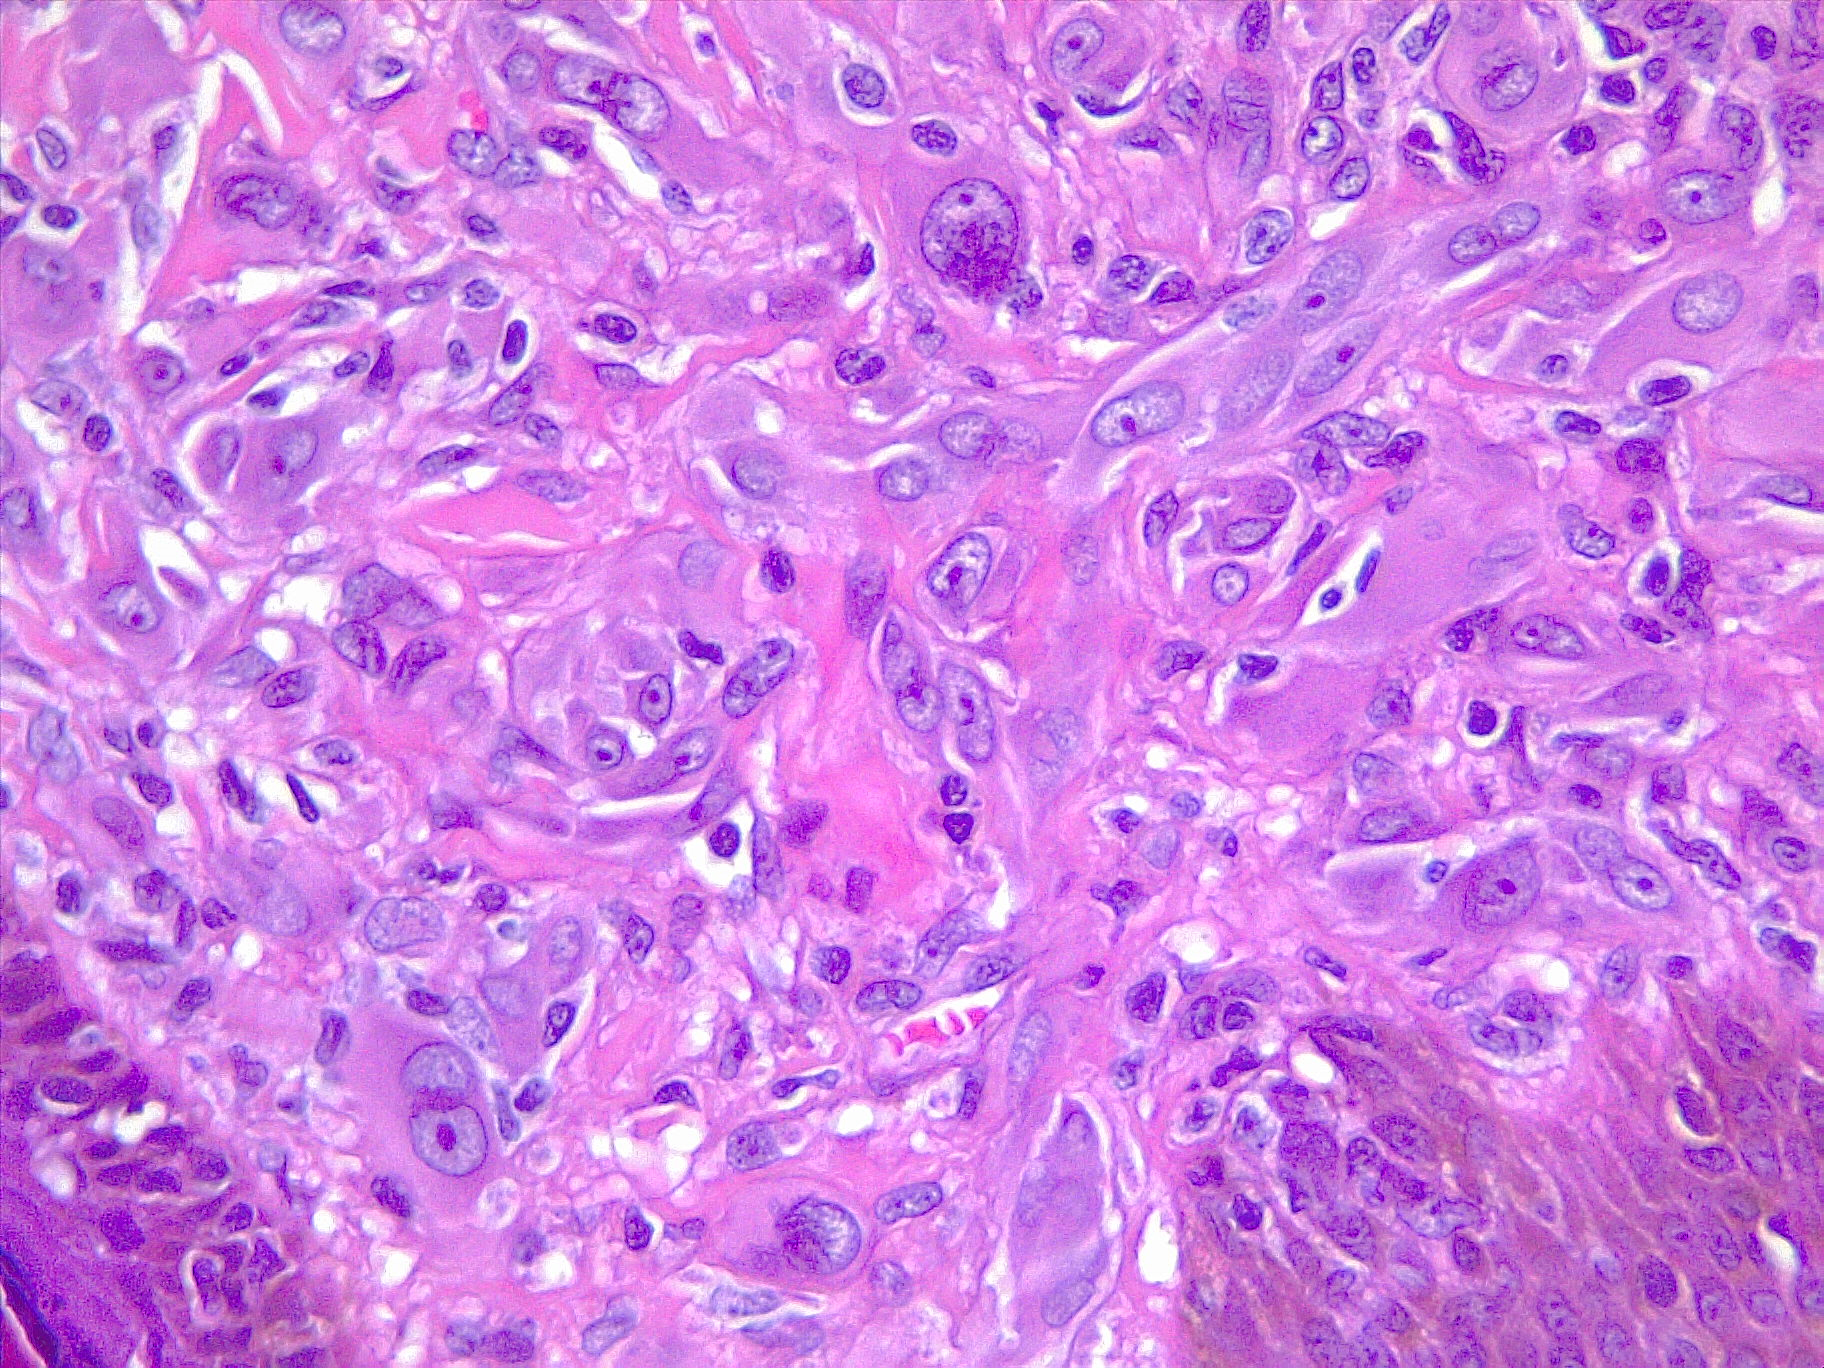 Spitz melanoma of the skin. Highly atypical melanocytes in the dermic component. H/E 20x